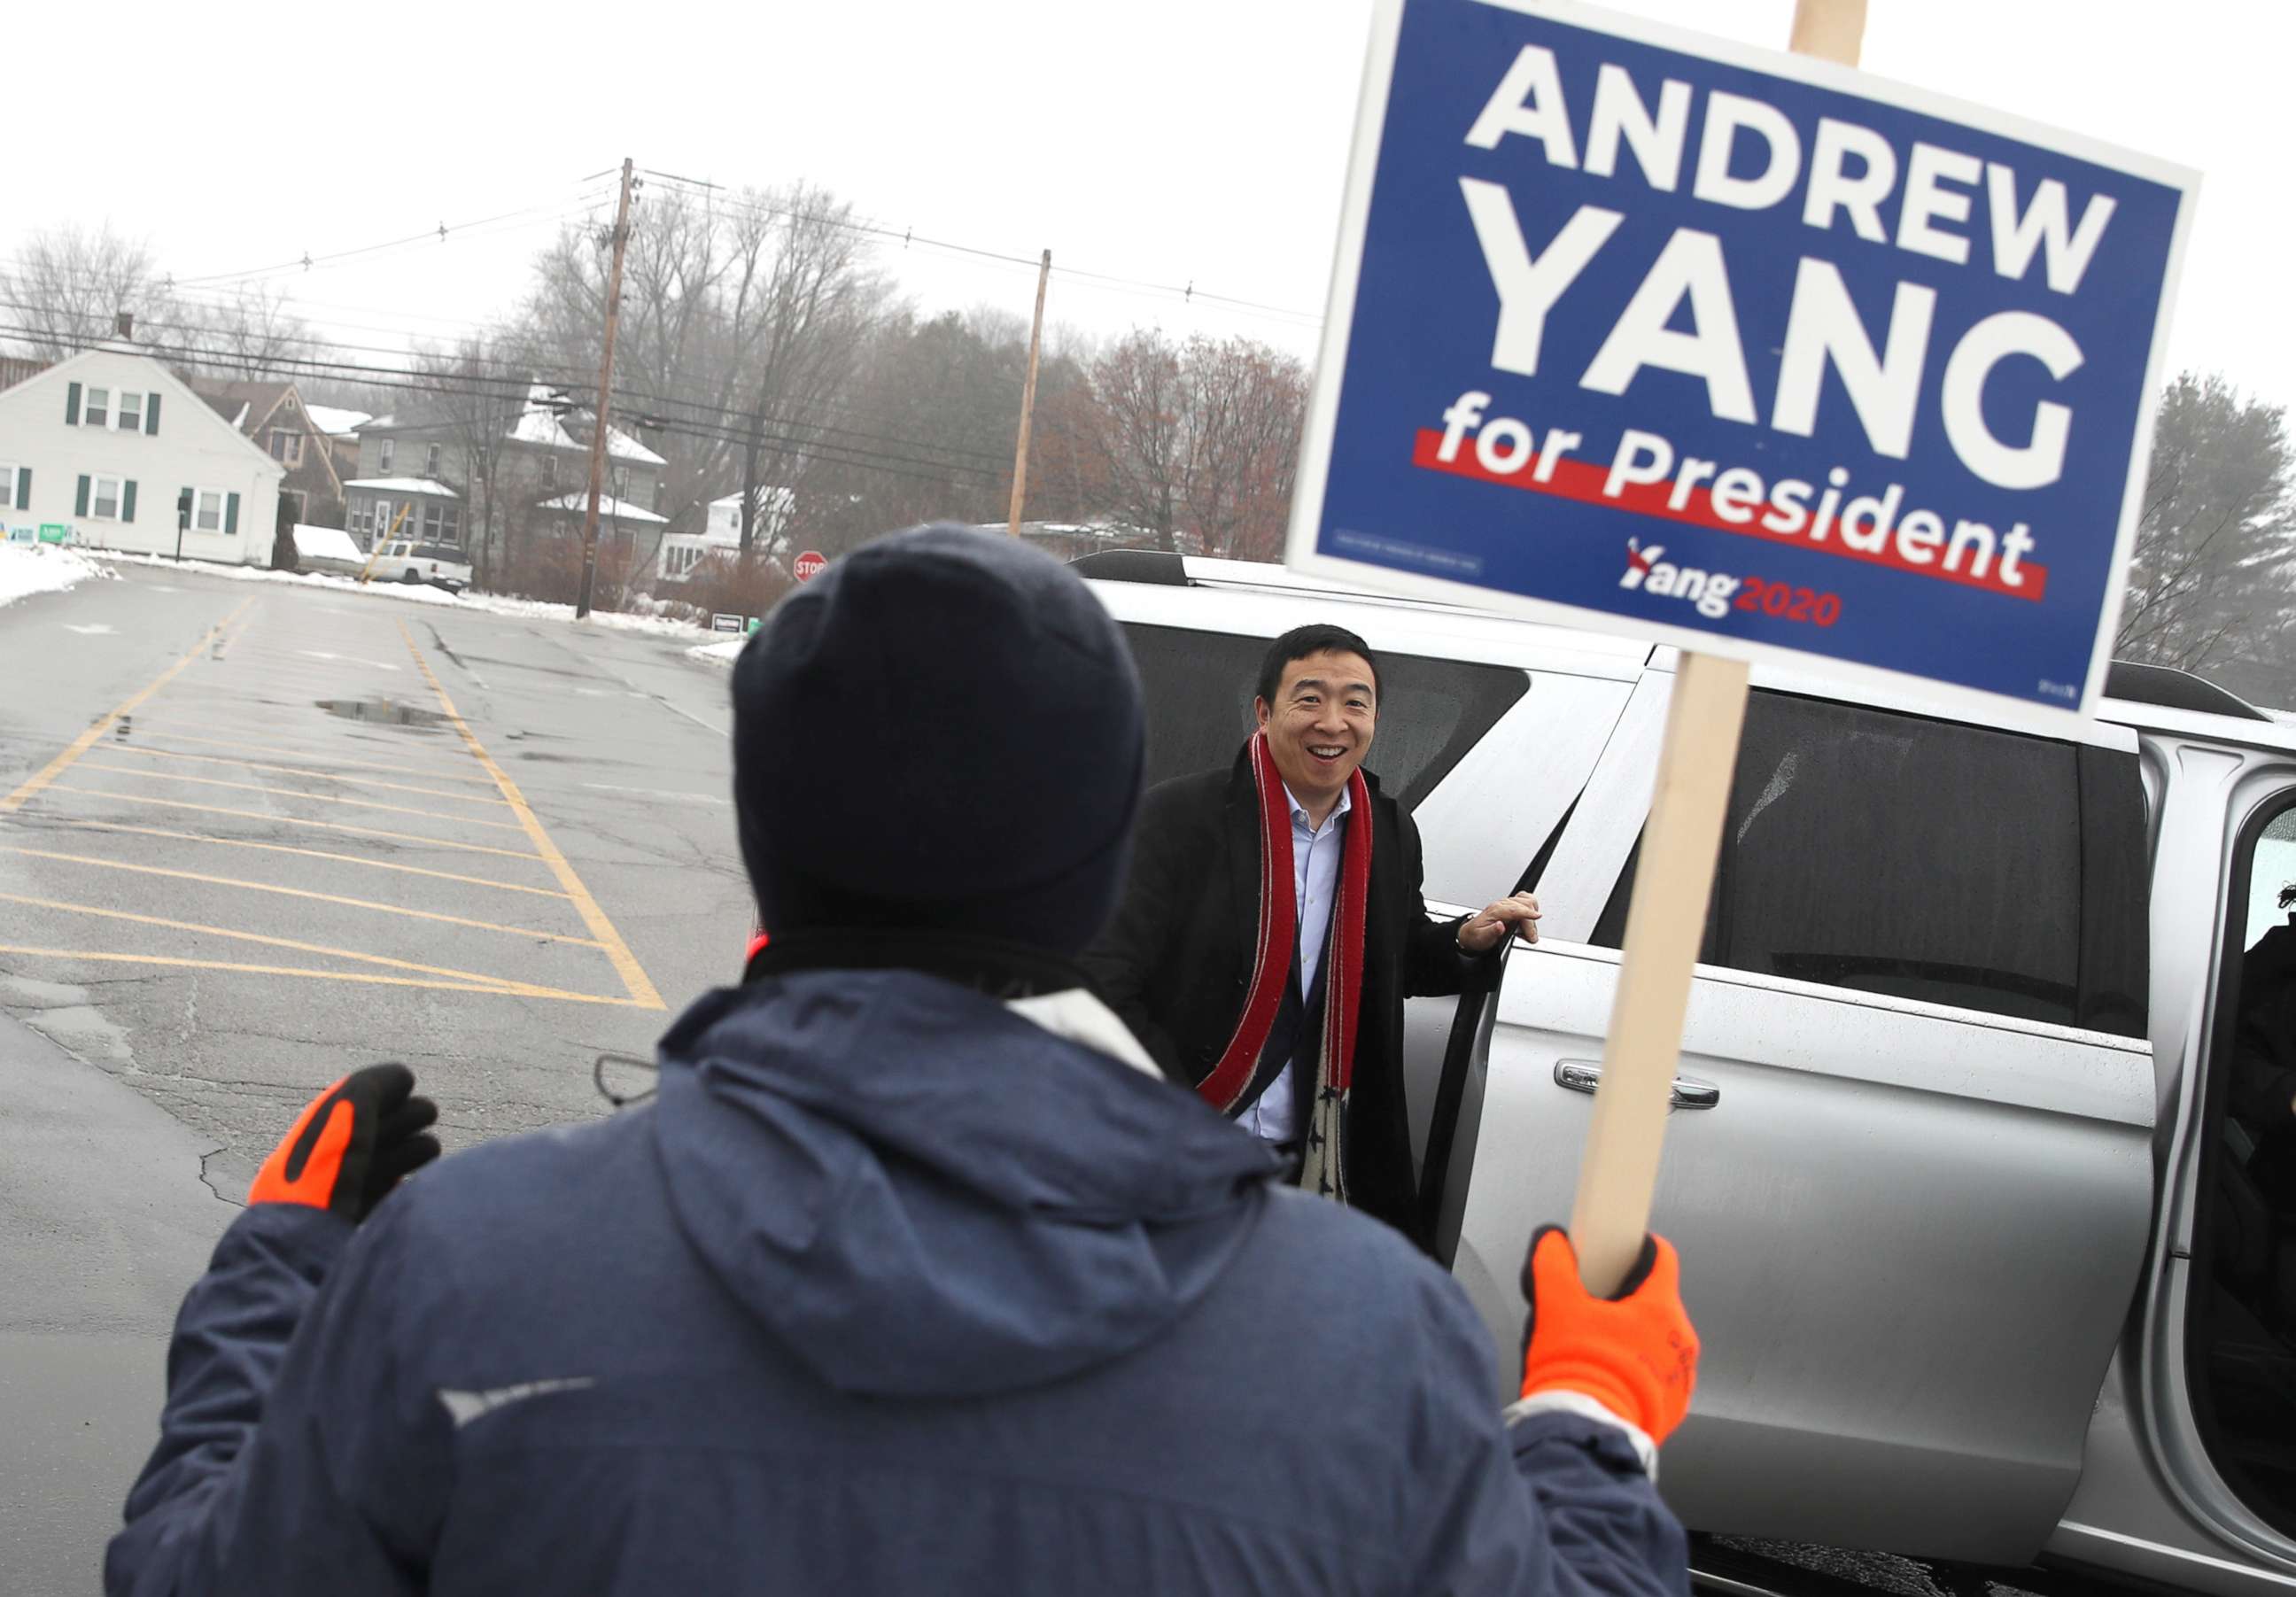 PHOTO: Democratic presidential candidate Andrew Yang greets a supporters who is holding a campaign sign in front of a polling station, Feb. 11, 2020, in Keene, N.H.